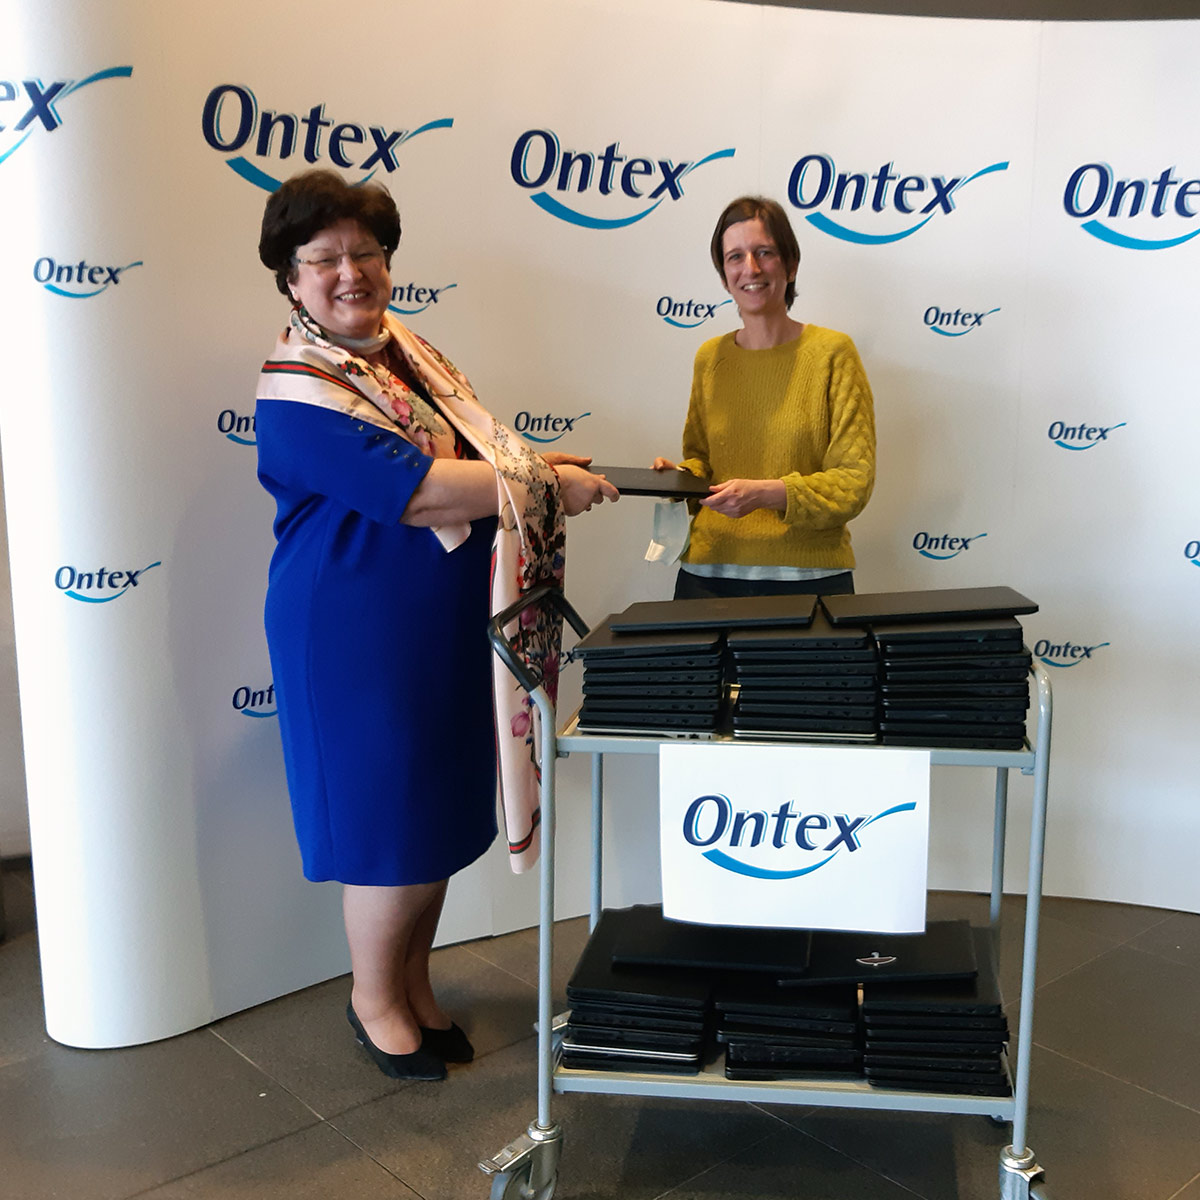 Annick De Poorter, EVP Sustainability & Innovation, Ontex and Nele Buyl, education specialist at charity 4deWereldgroep in Aalst, Belgium on February 17, 2022.